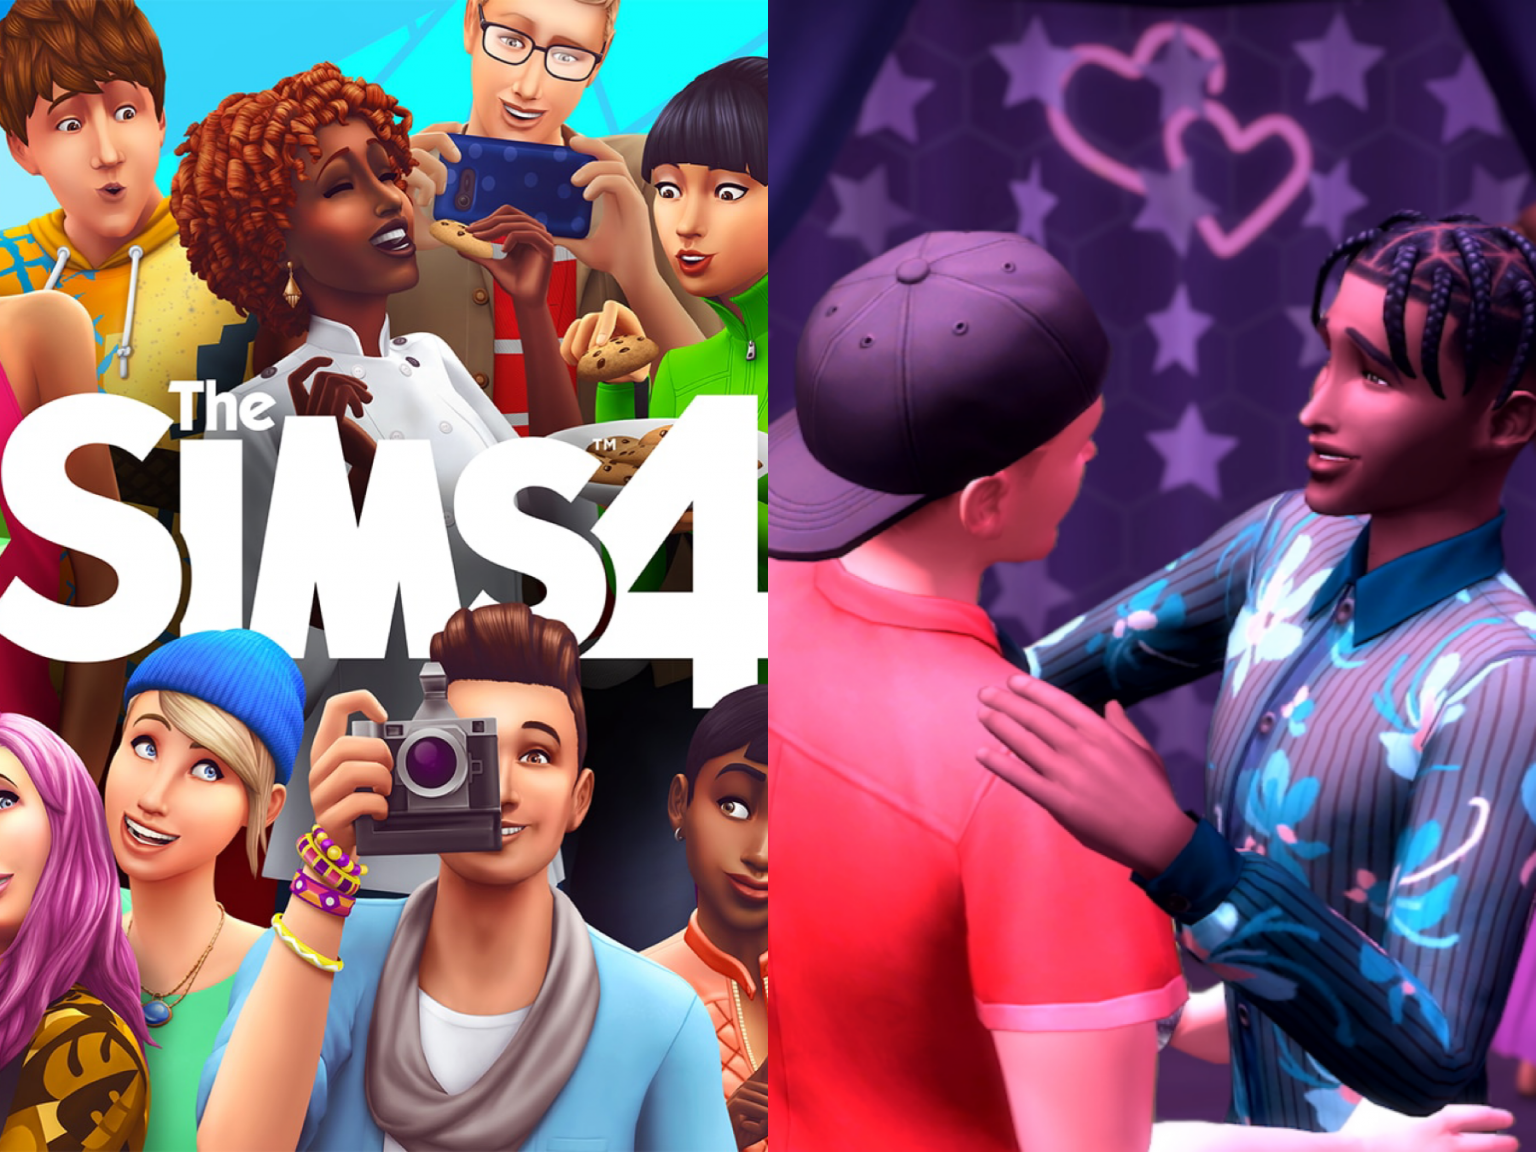 Sims 4s Update Includes Sexual Orientation Feature So You Can Woohoo” With Anyone With Consent